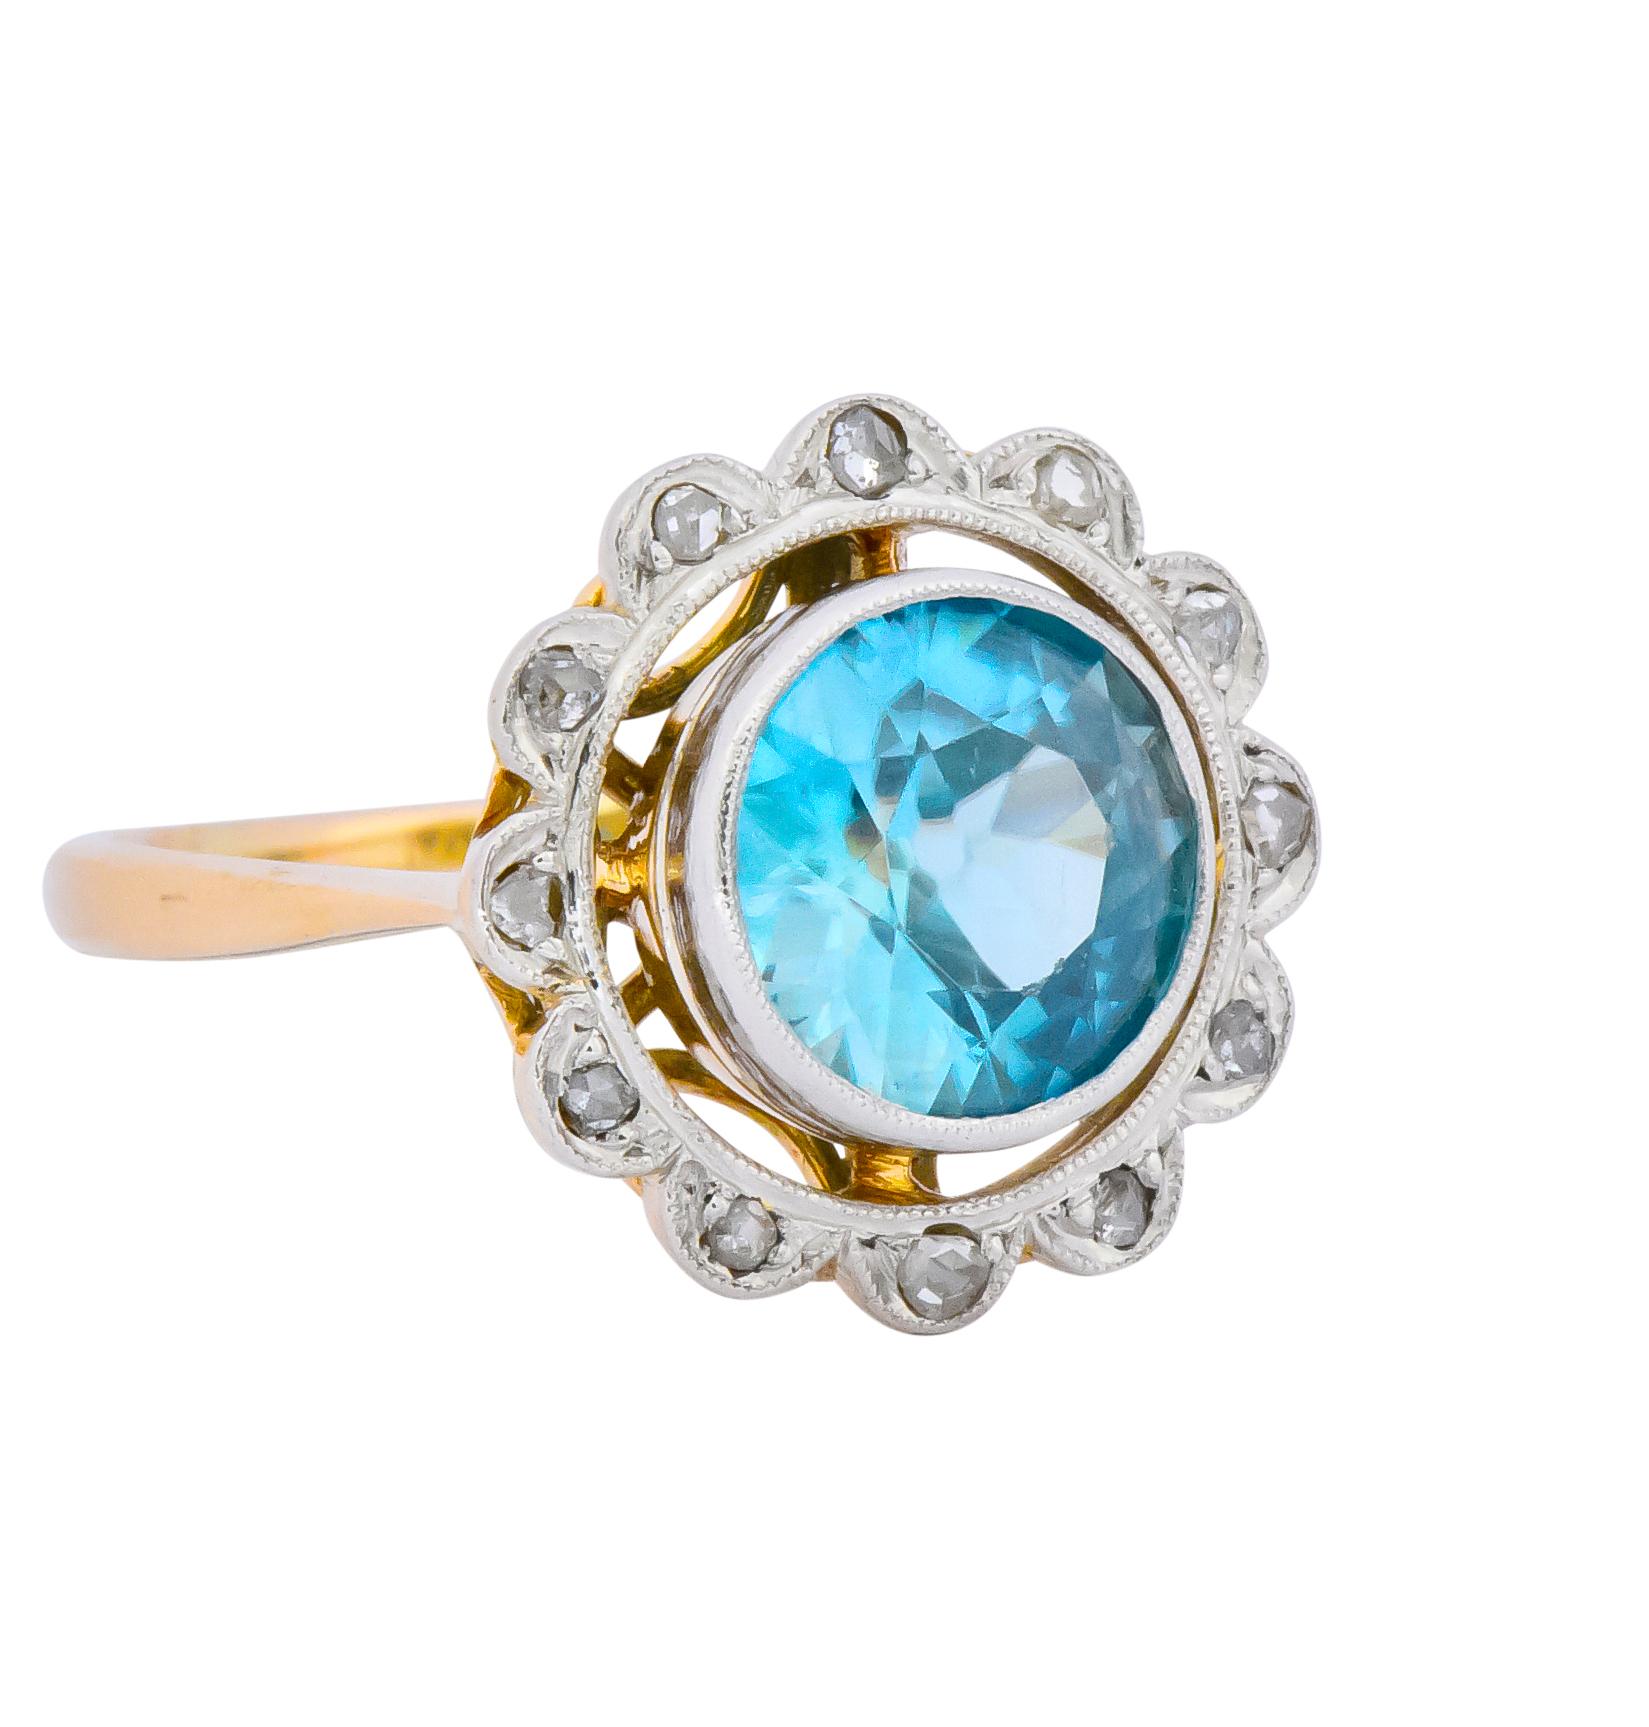 Centering a round cut bezel set zircon weighing approximately 2.20 carats, bright medium blue

With a delicate rose cut diamond halo

Platinum-topped with a pierced scrolling heart motif gallery

Tested as platinum and 14 karat gold

Ring Size: 5 &